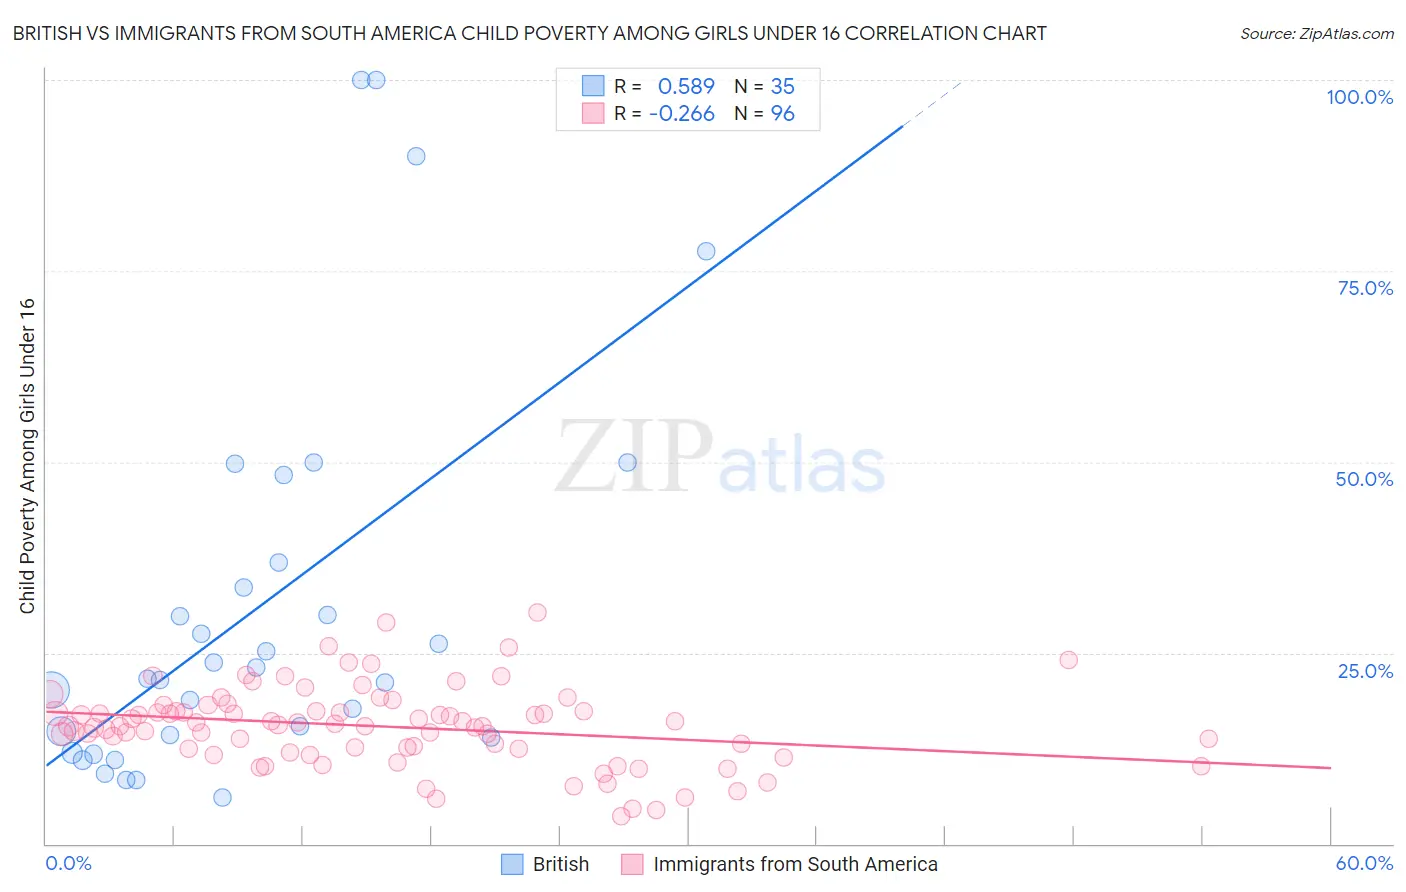 British vs Immigrants from South America Child Poverty Among Girls Under 16